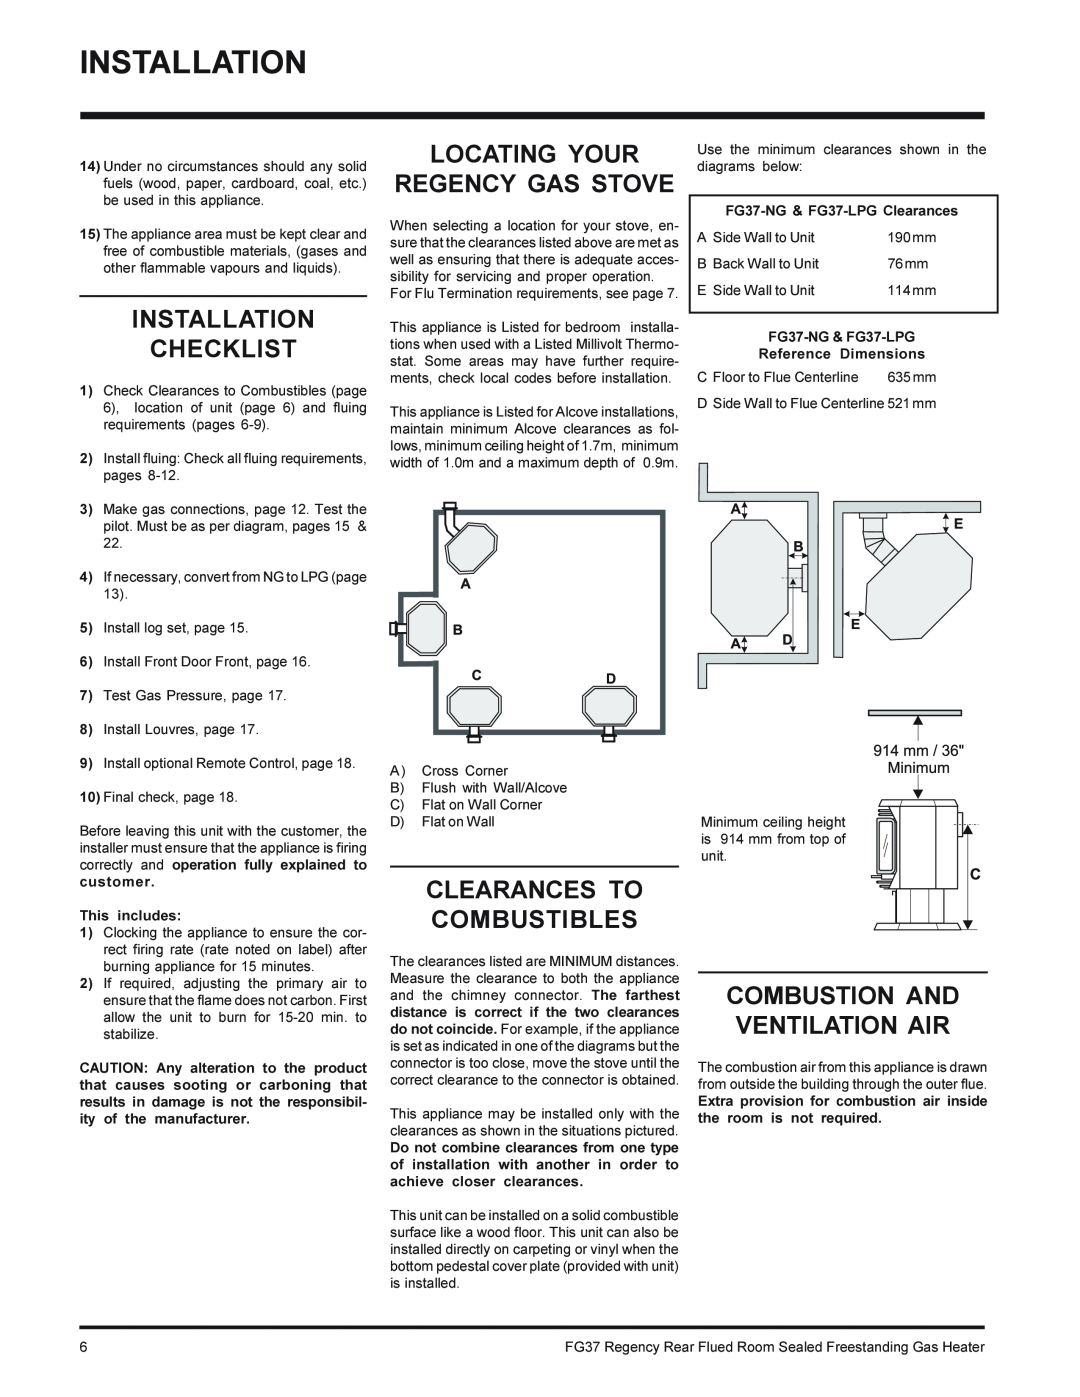 Regency FG37-LPG, FG37-NG Installation Checklist, Locating Your Regency Gas Stove, Clearances To Combustibles 